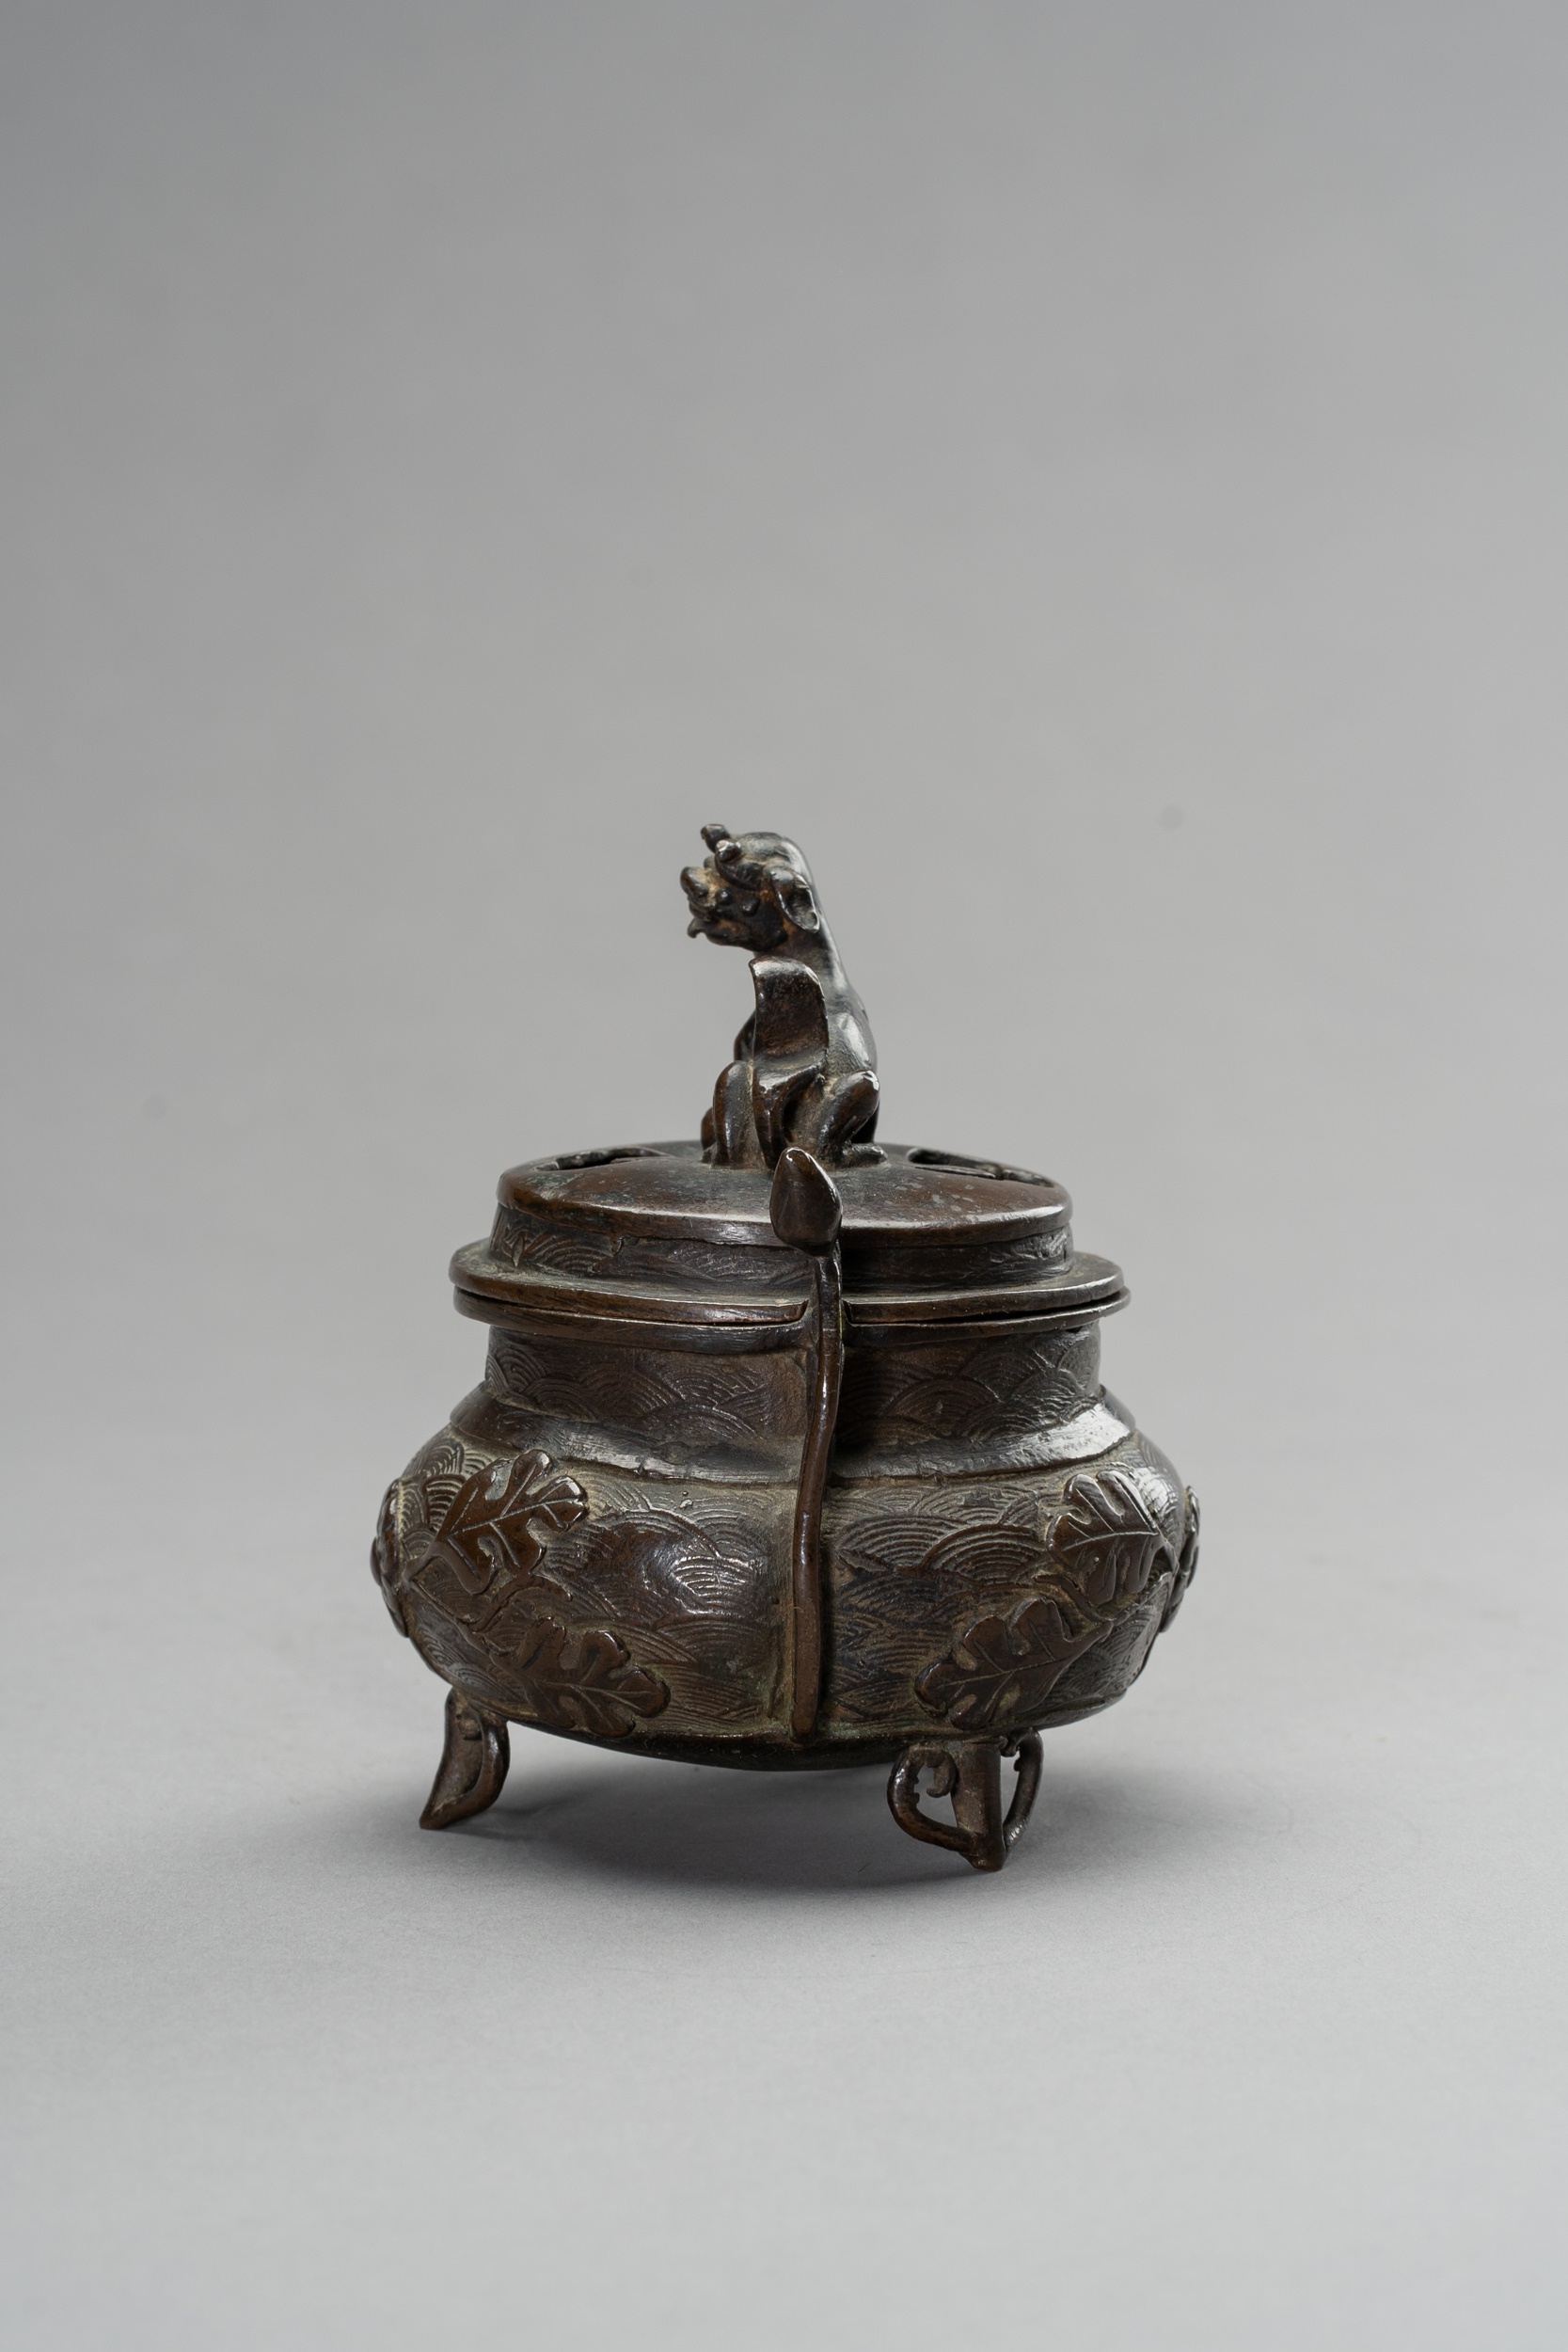 A MINATURE BRONZE TRIPOD CENSER, QING DYNASTY - Image 8 of 11